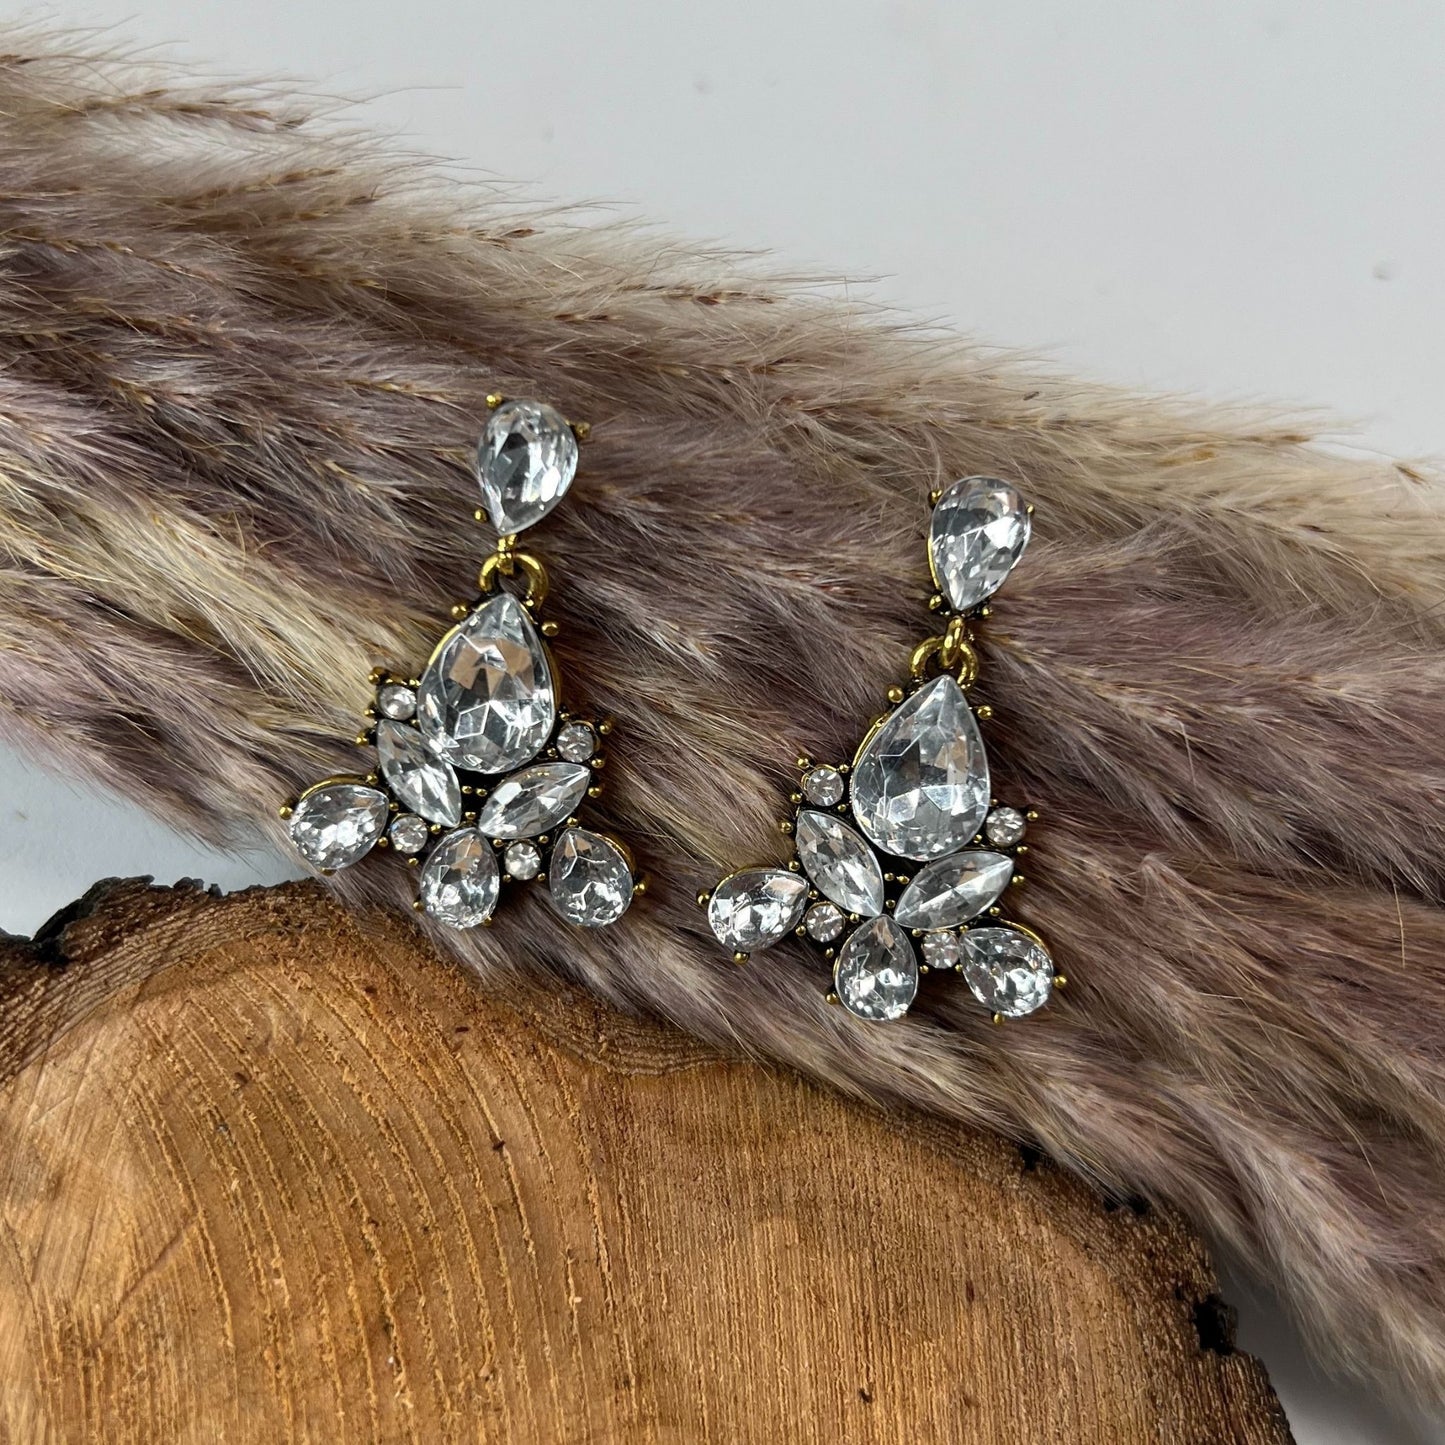 Long earrings with crystals